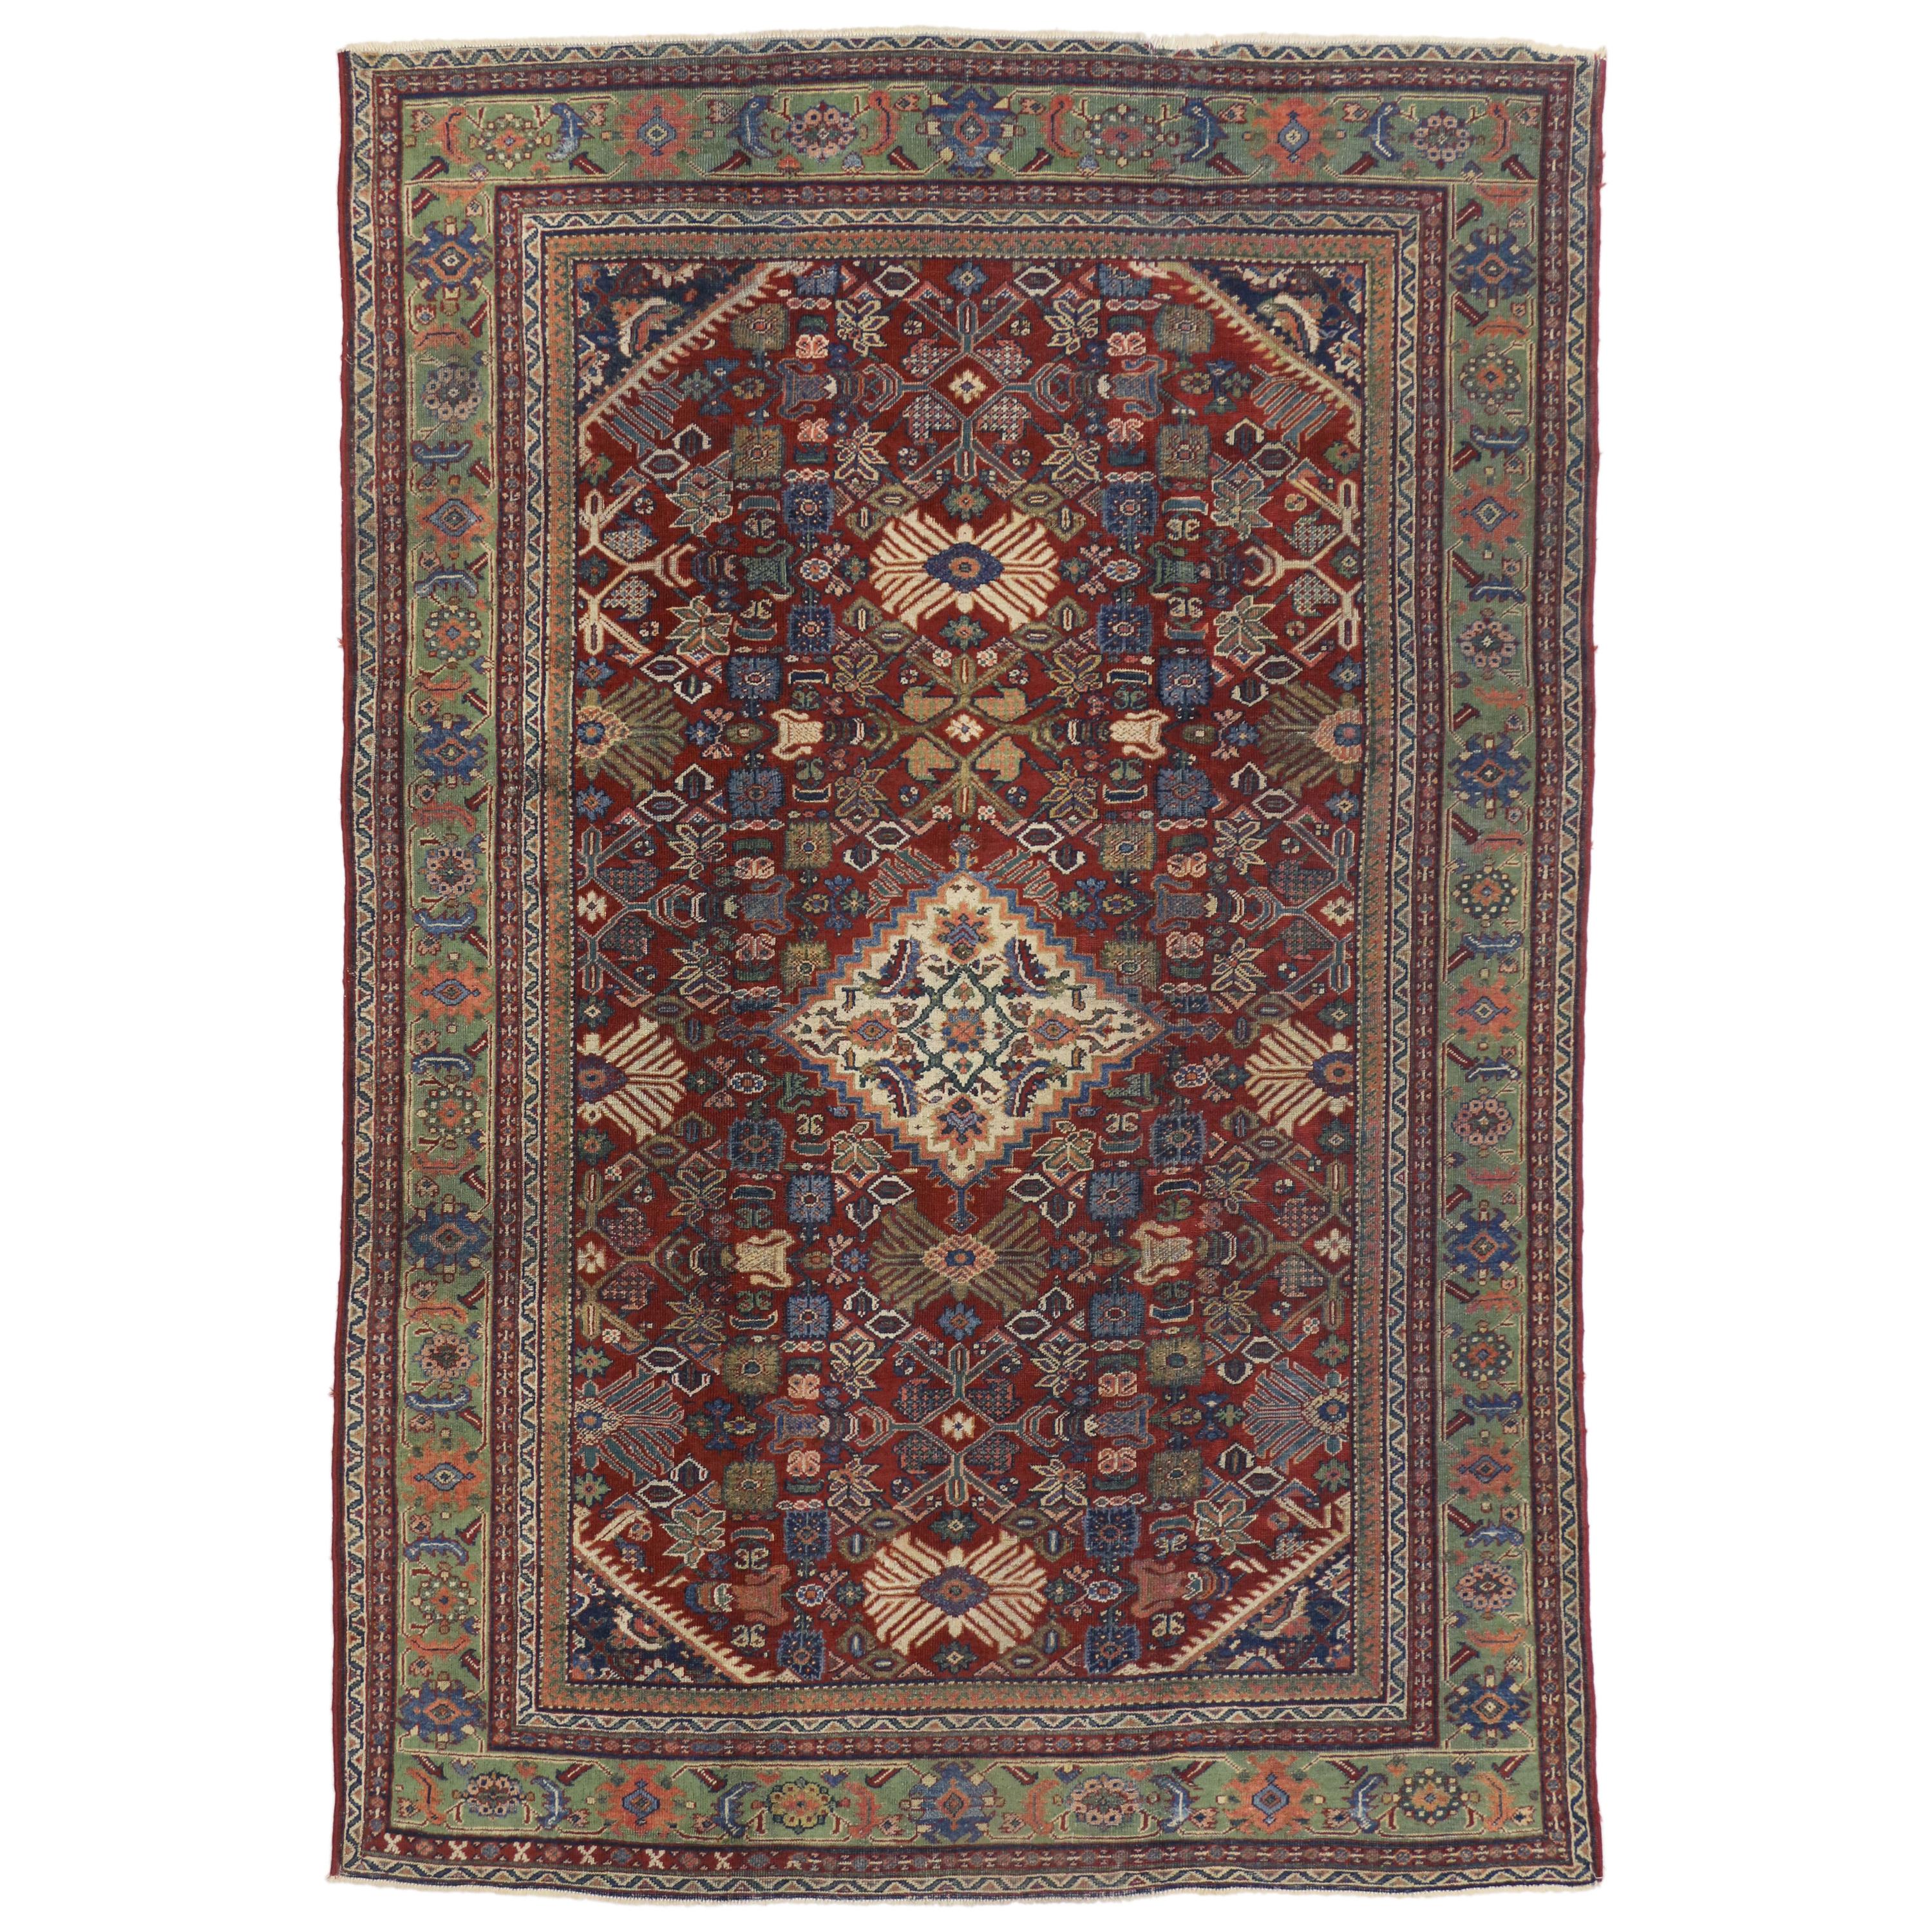 Antique Persian Mahal Rug with Rustic Gustavian Art Deco Style